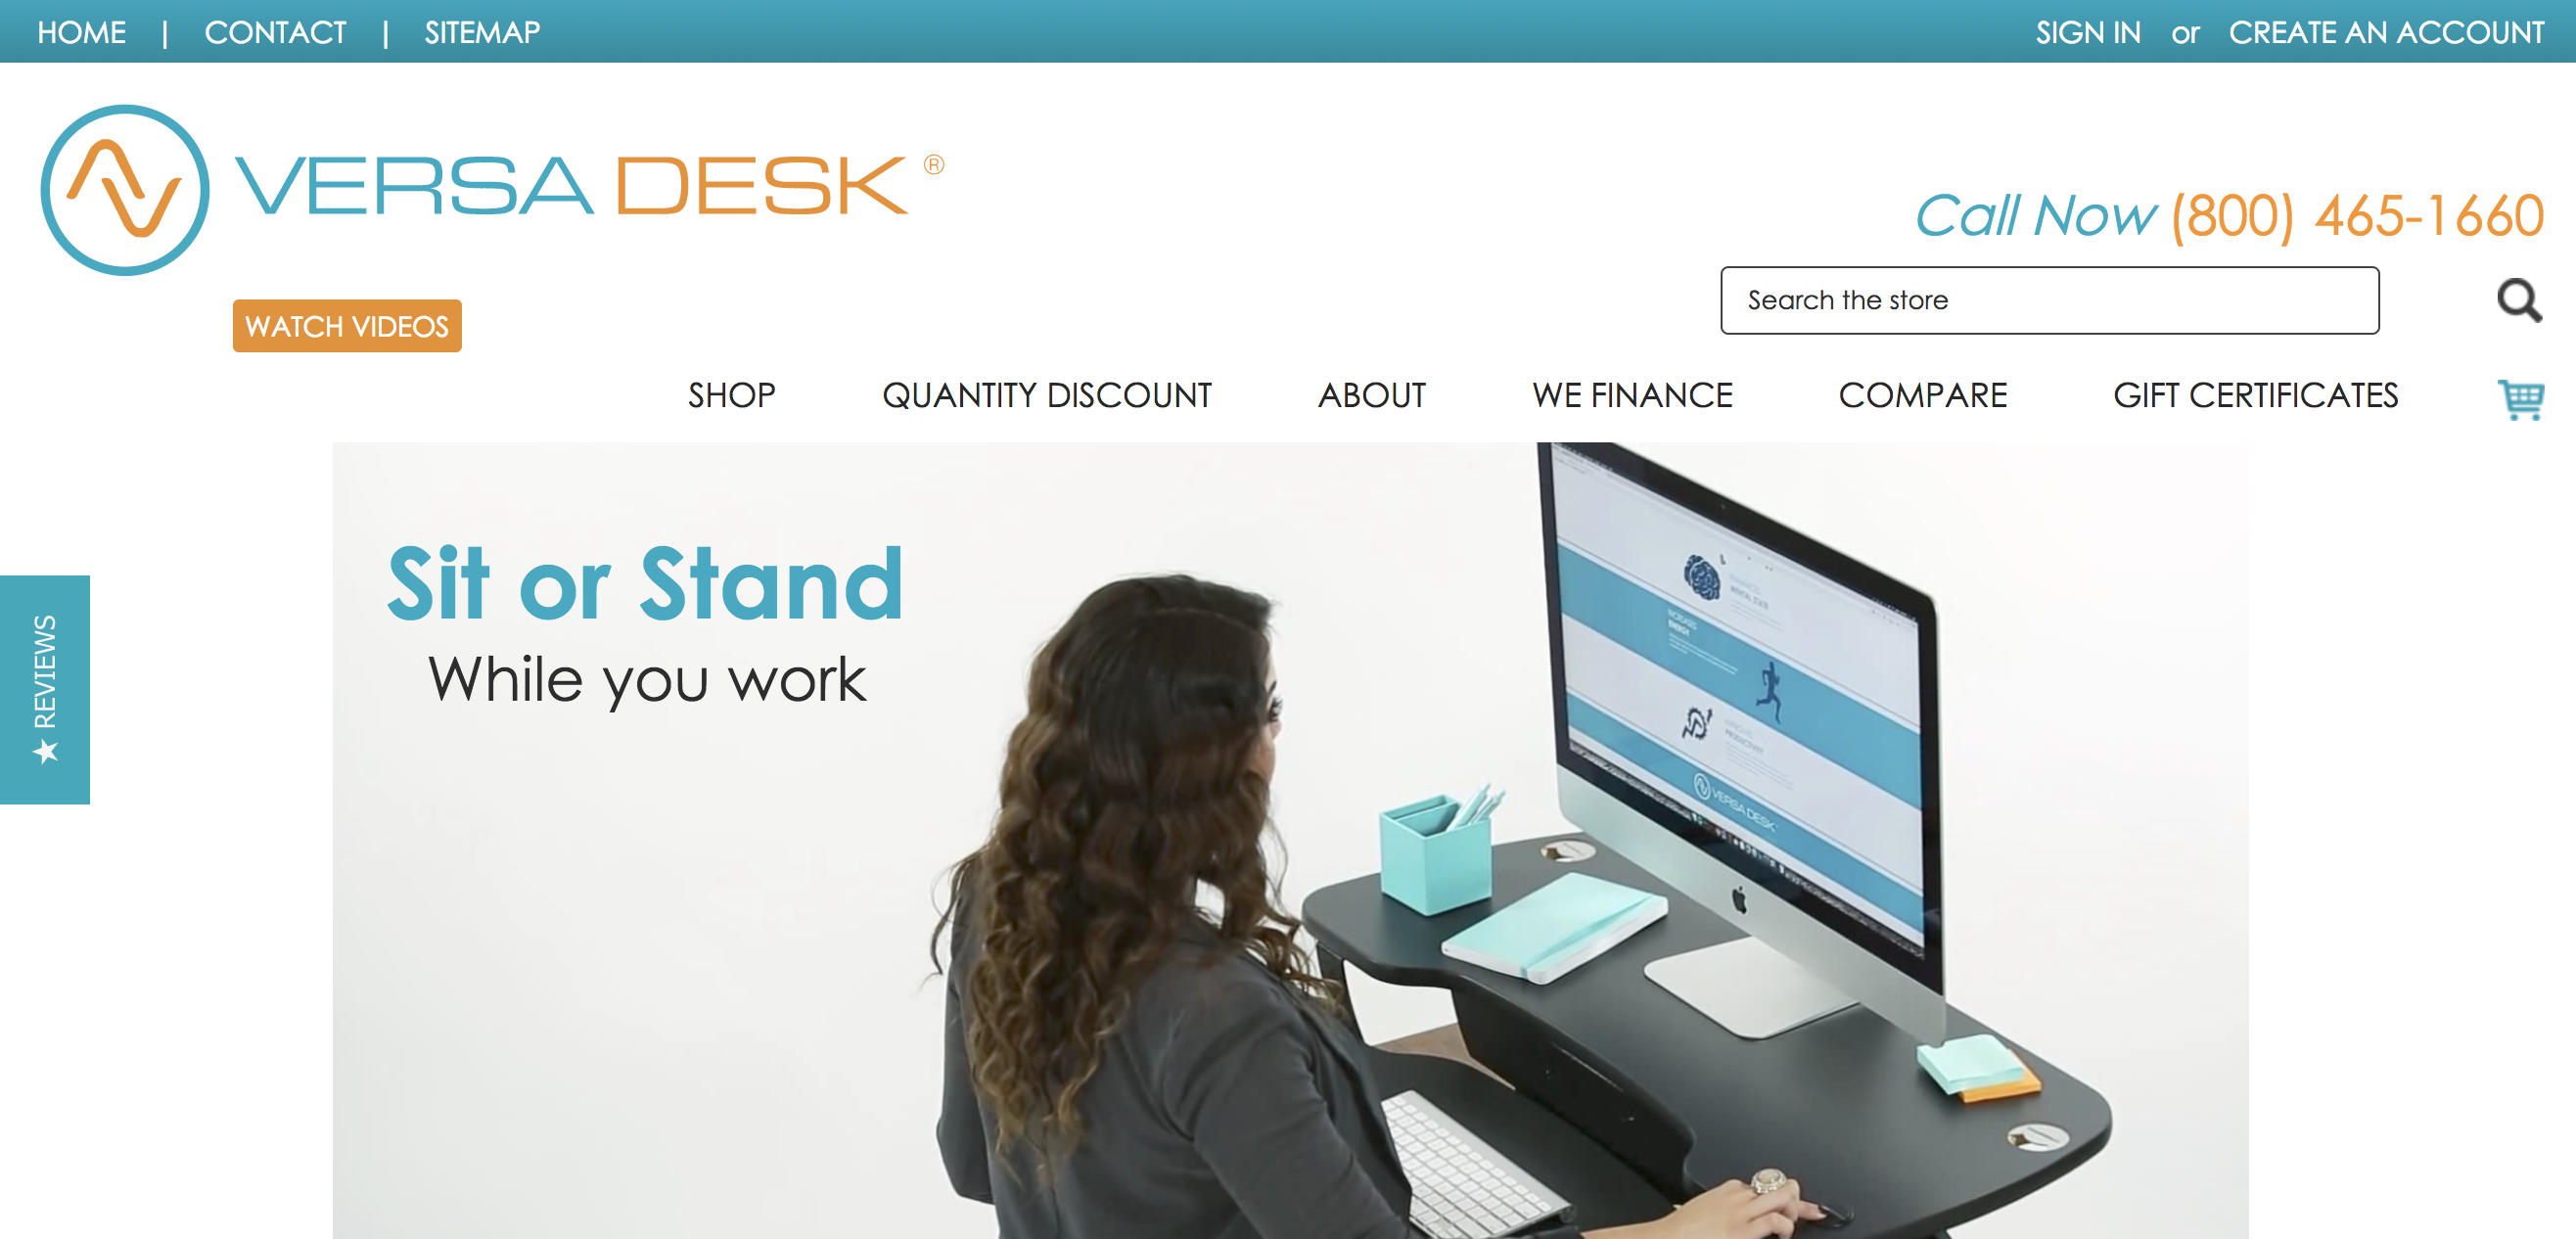 The Good Marketing Company has worked with Versa Desk